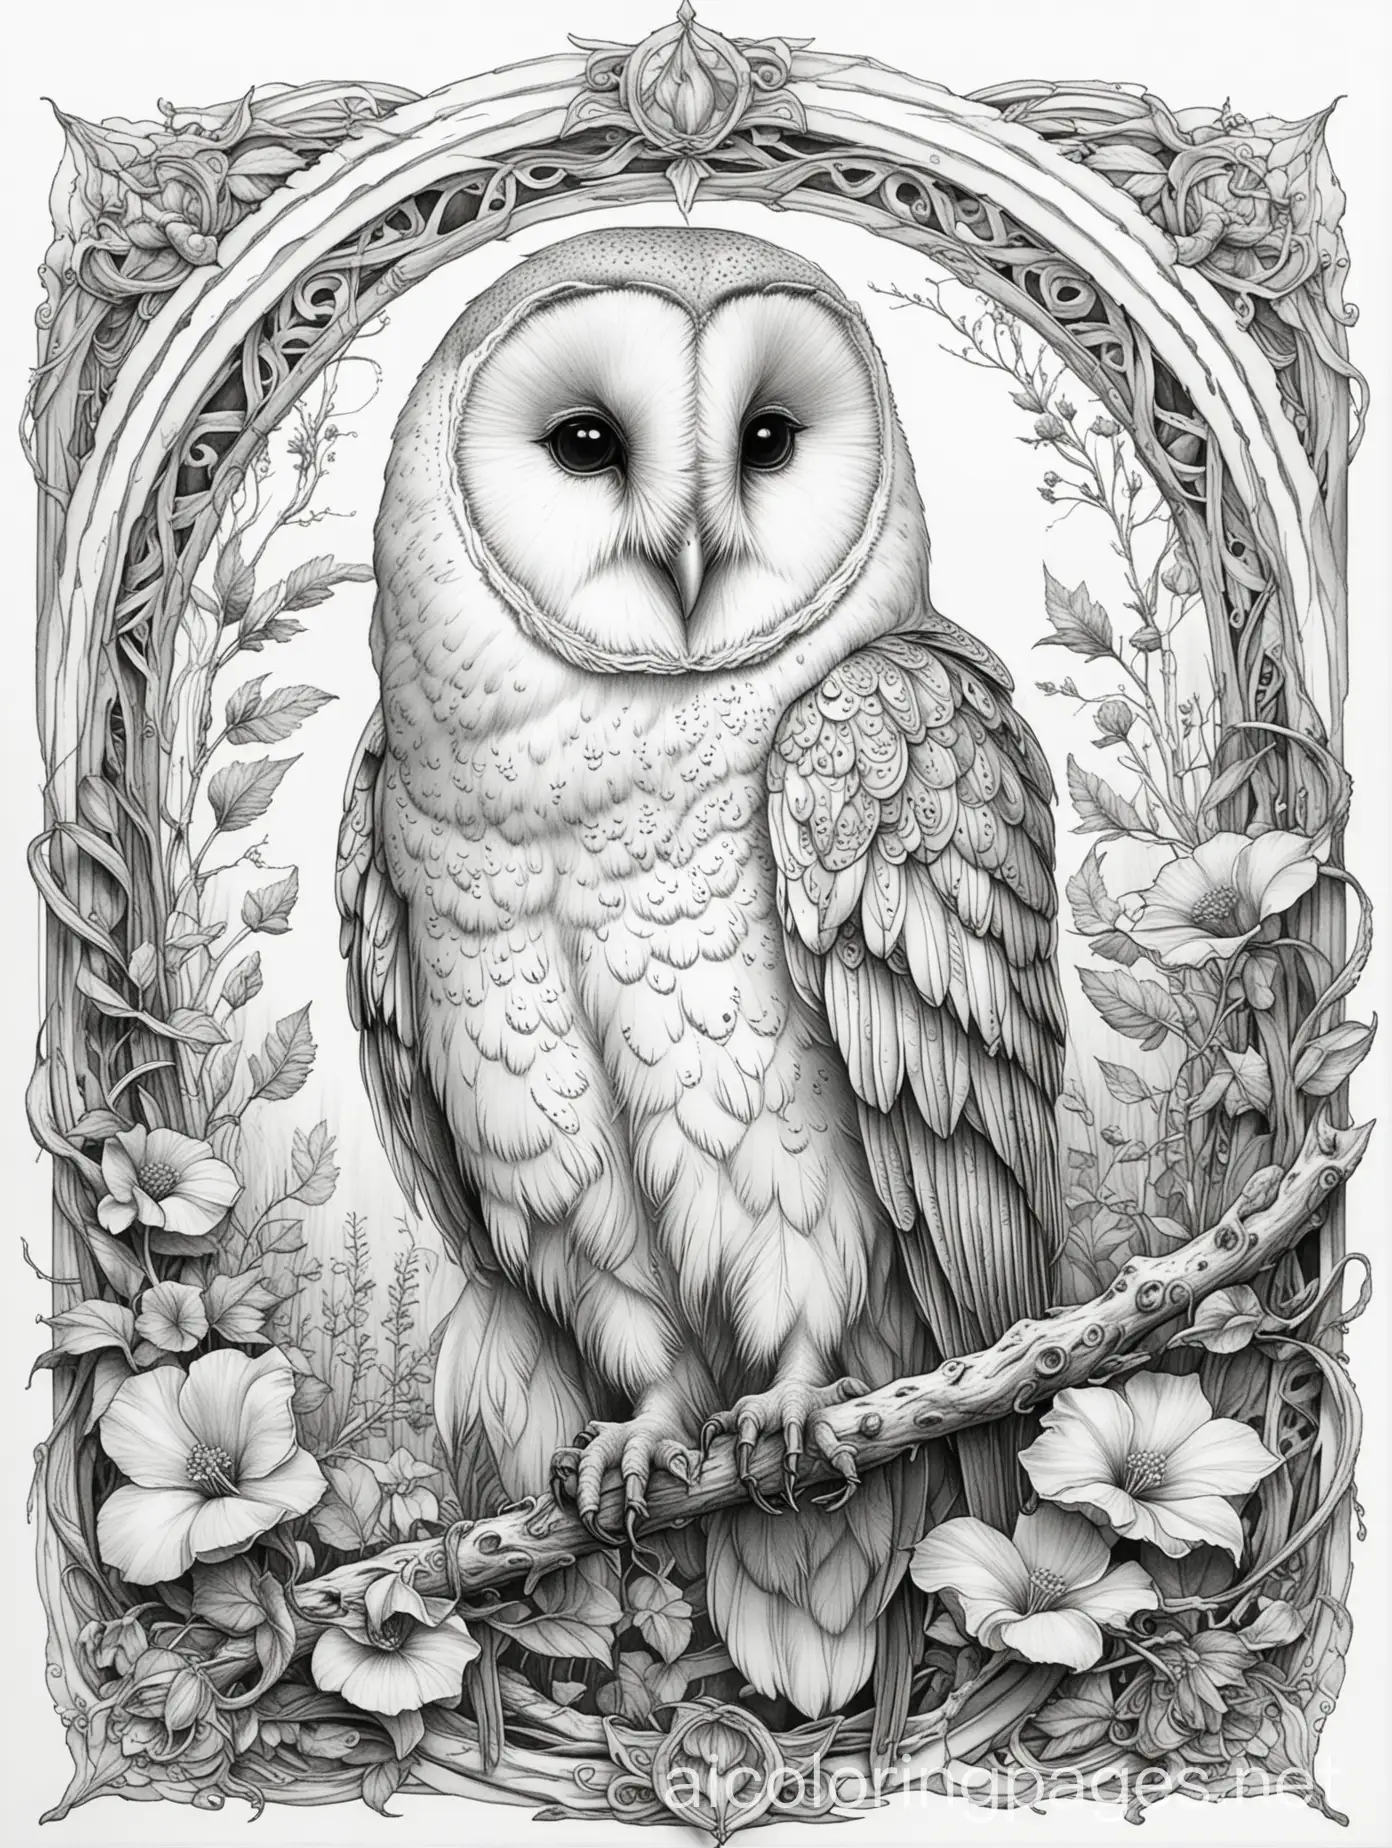 Ethereal-Fantasy-Barn-Owl-Coloring-Page-Inspired-by-Brian-Froud